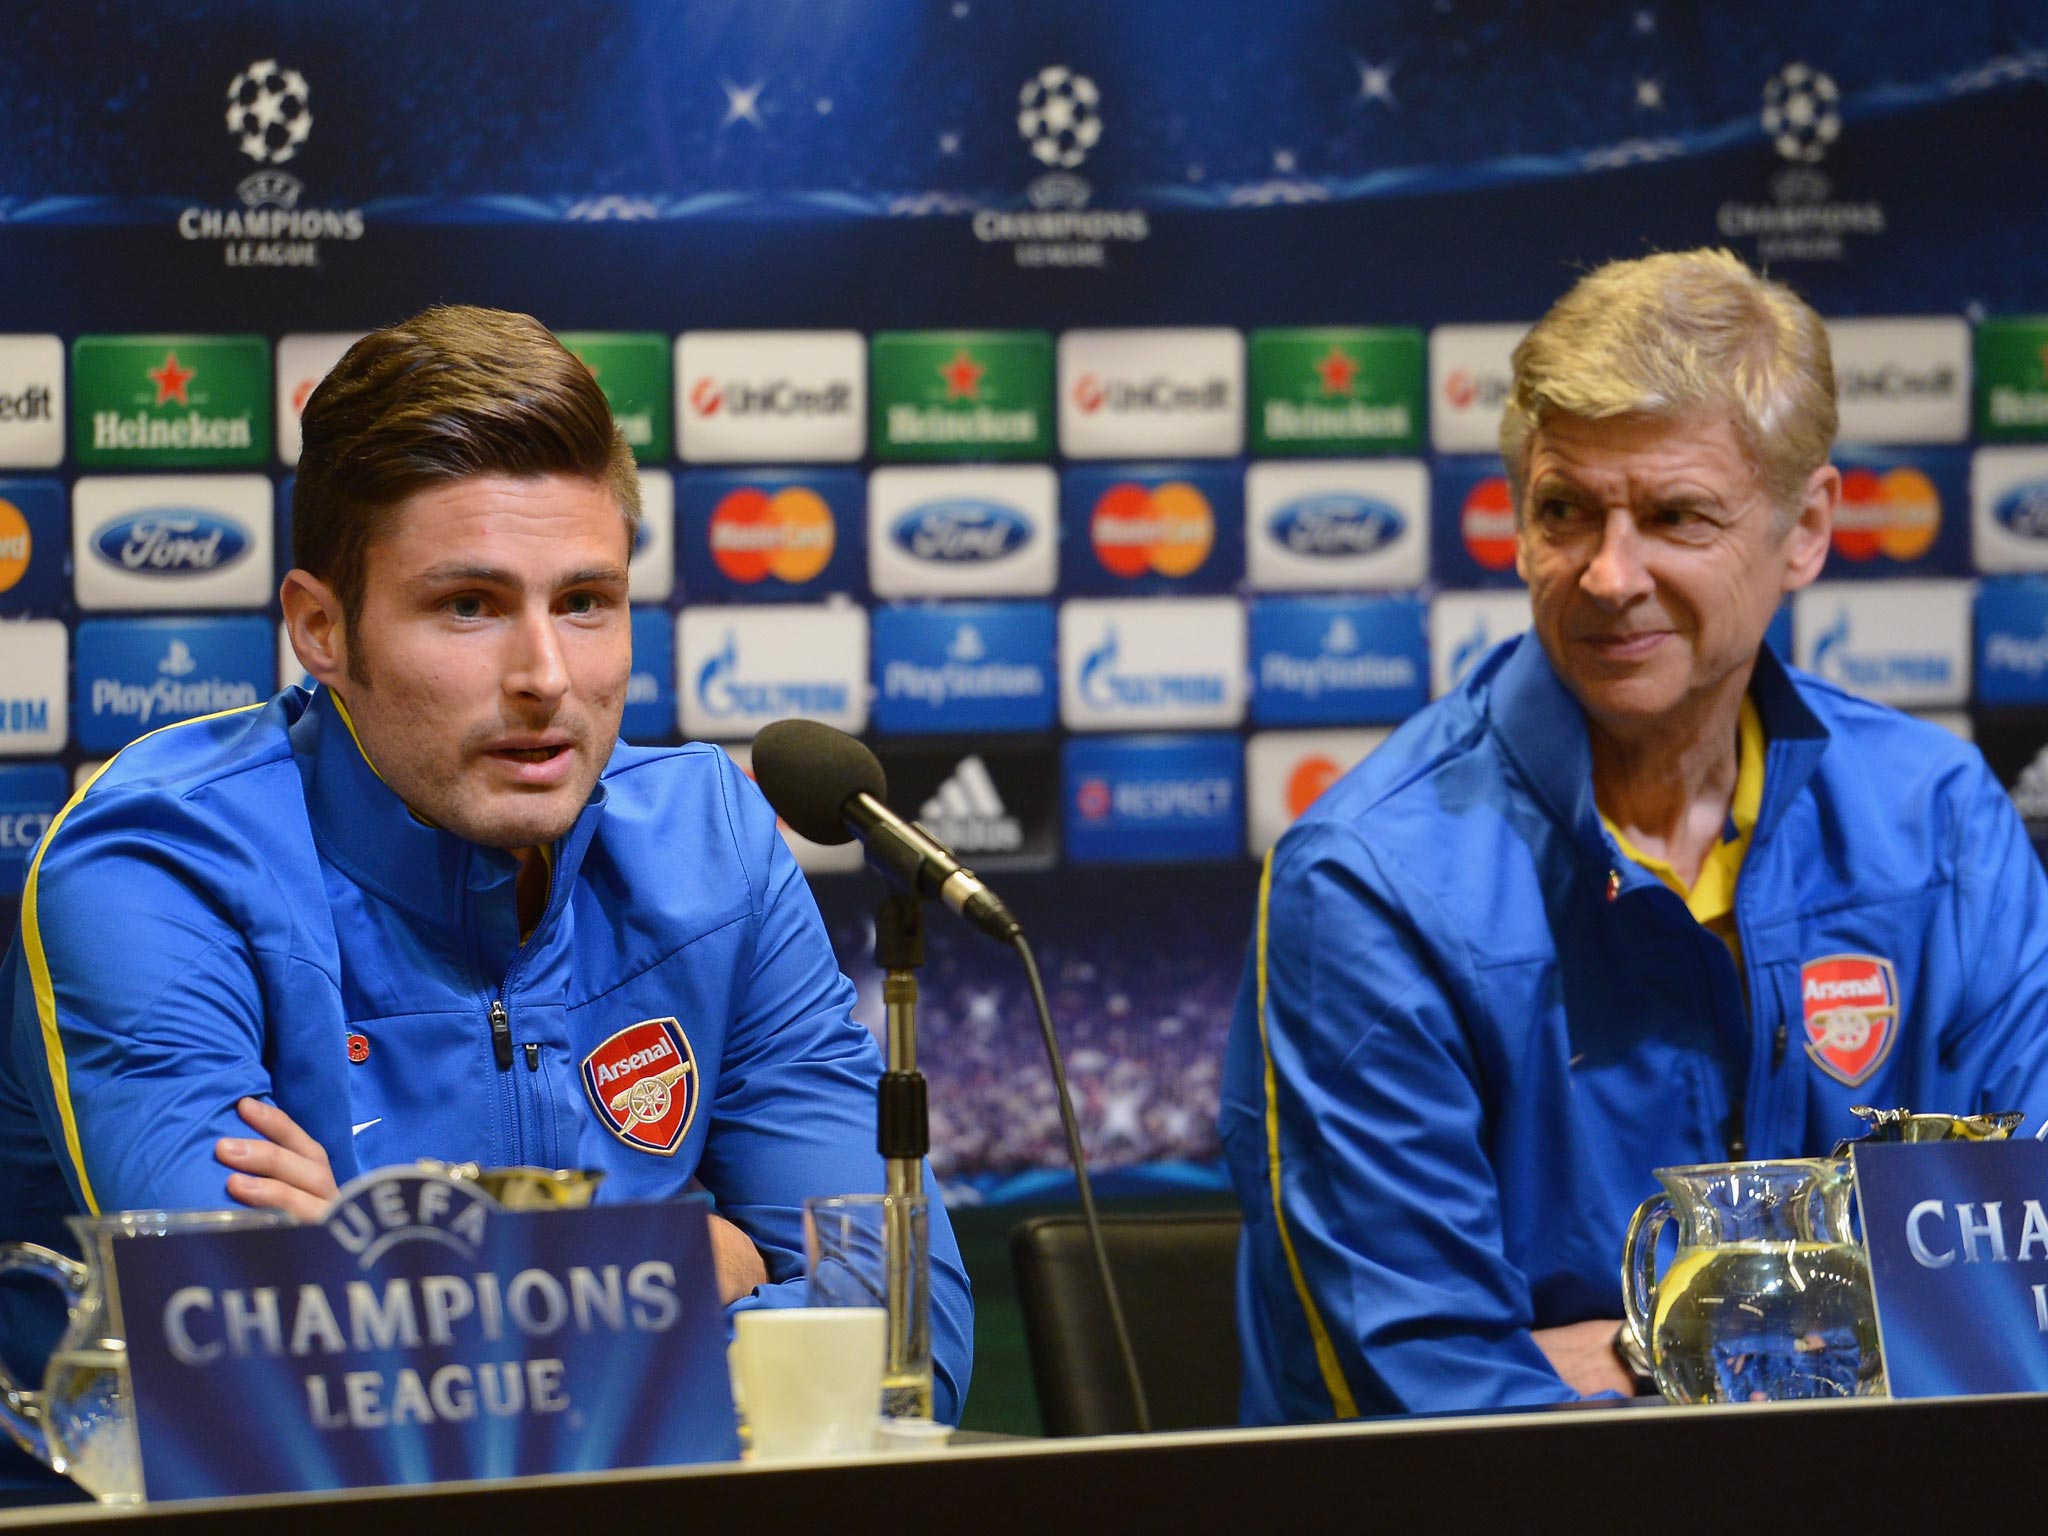 Olivier Giroud has thanked Arsenal manager Arsene Wenger for helping him to recover from affair revelations published in a national newspaper